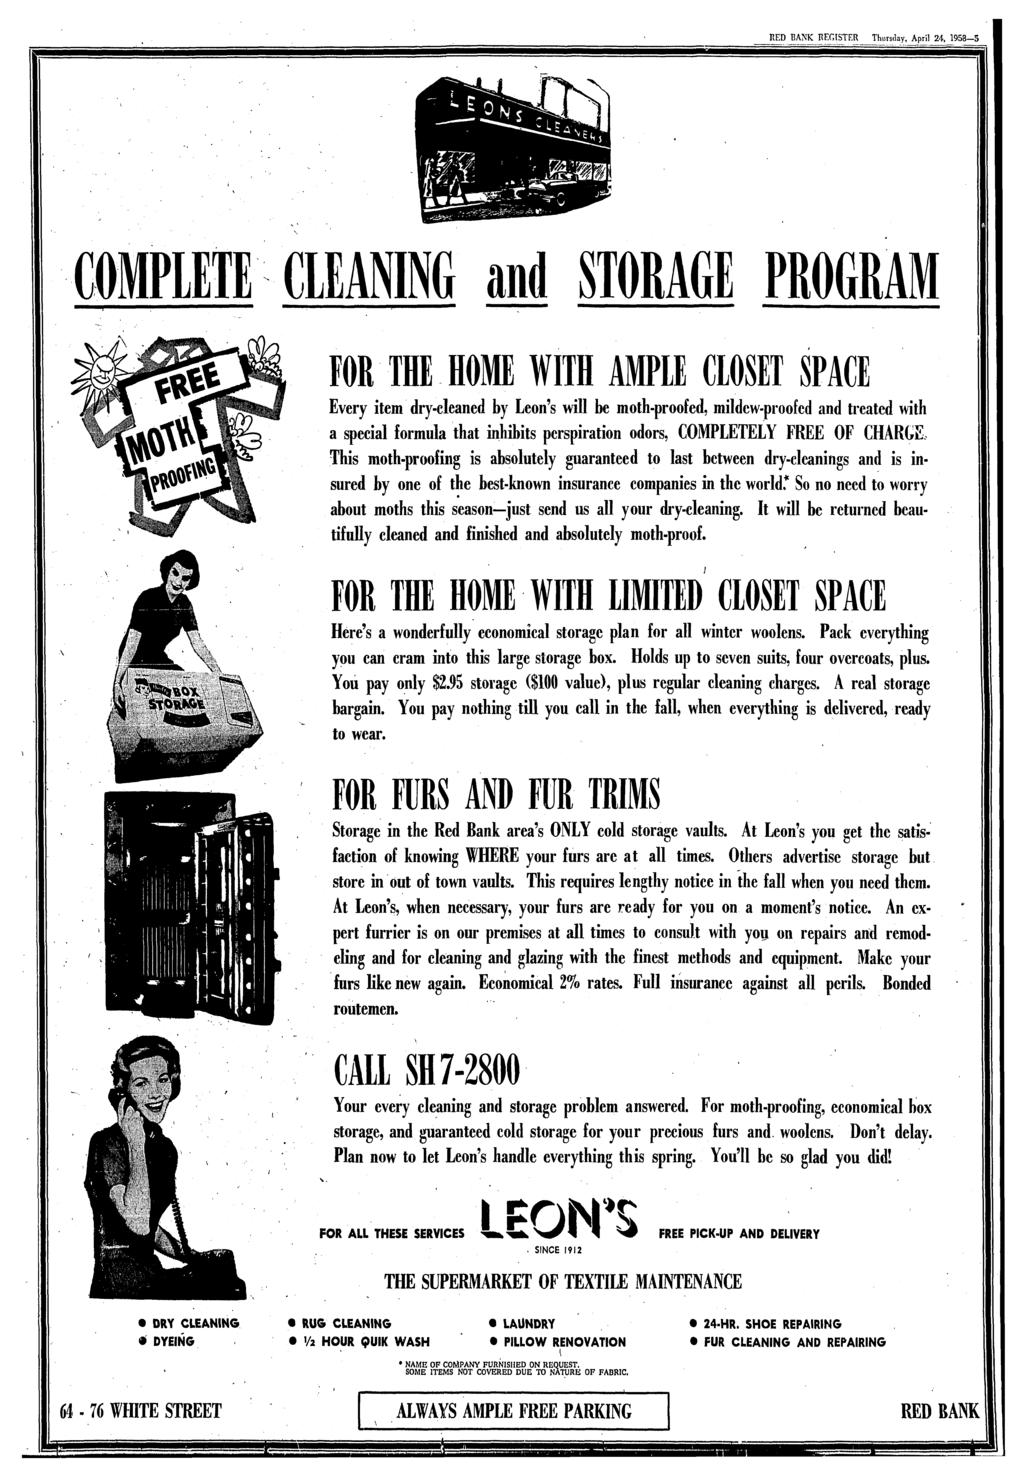 REGISTER Thursday, April 24, 1953 5 COMPLETE CLEANING and STORAGE PROGRAM FOR THE HOME WITH AMPLE CLOSET SPACE Every item dry-cleaned by Leon's will be moth-proofed, mildew-proofed and treated with a